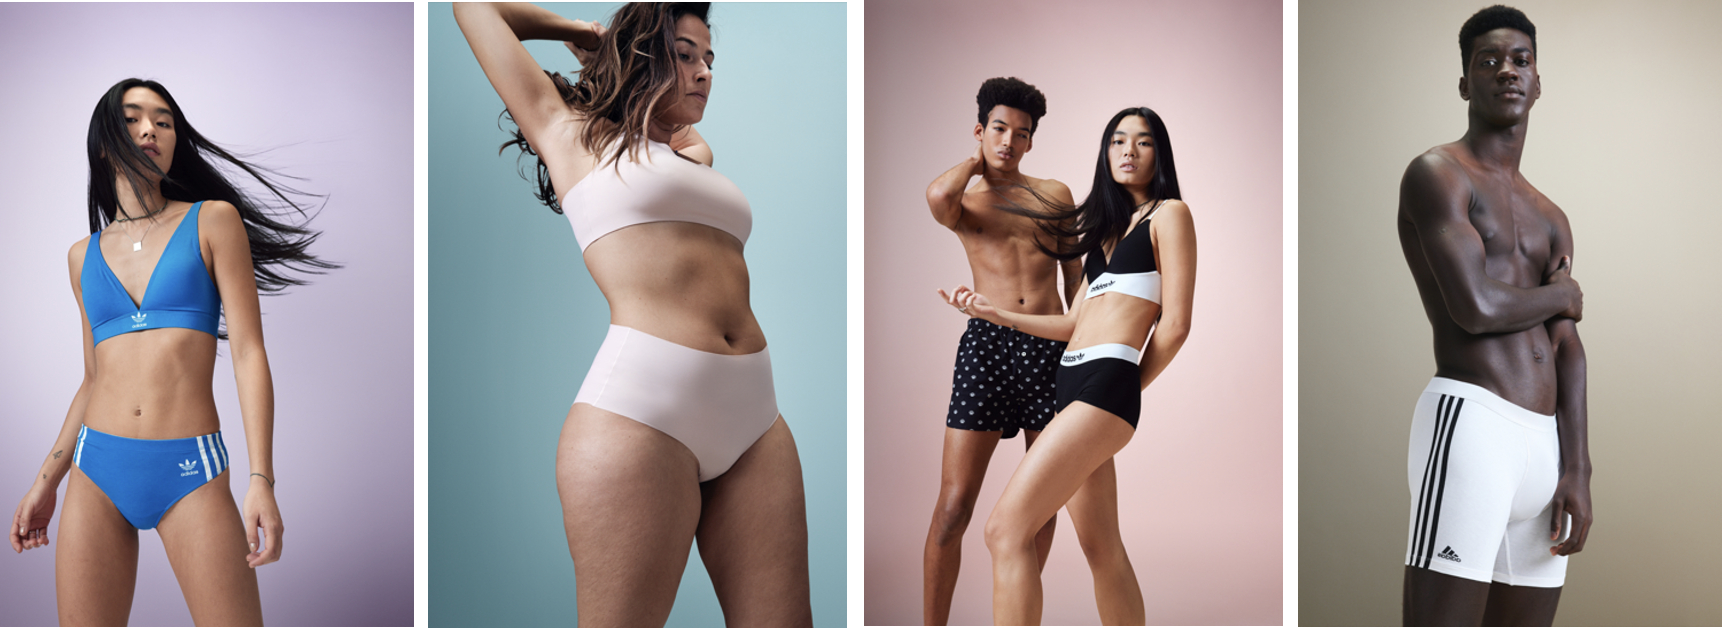 adidas and Delta Galil Full-Range Underwear for | Business Wire